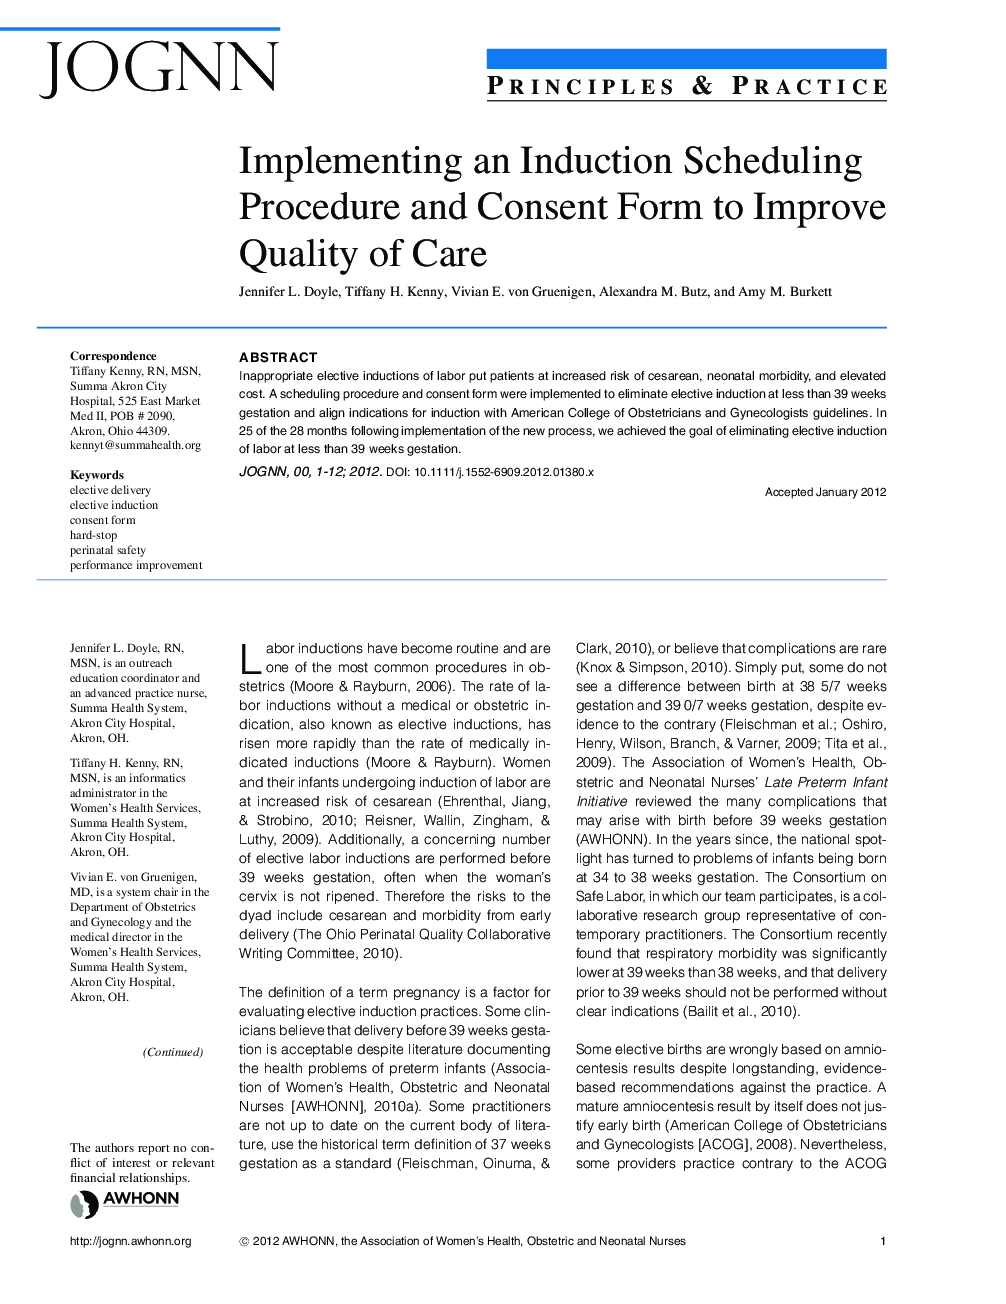 Implementing an Induction Scheduling Procedure and Consent Form to Improve Quality of Care